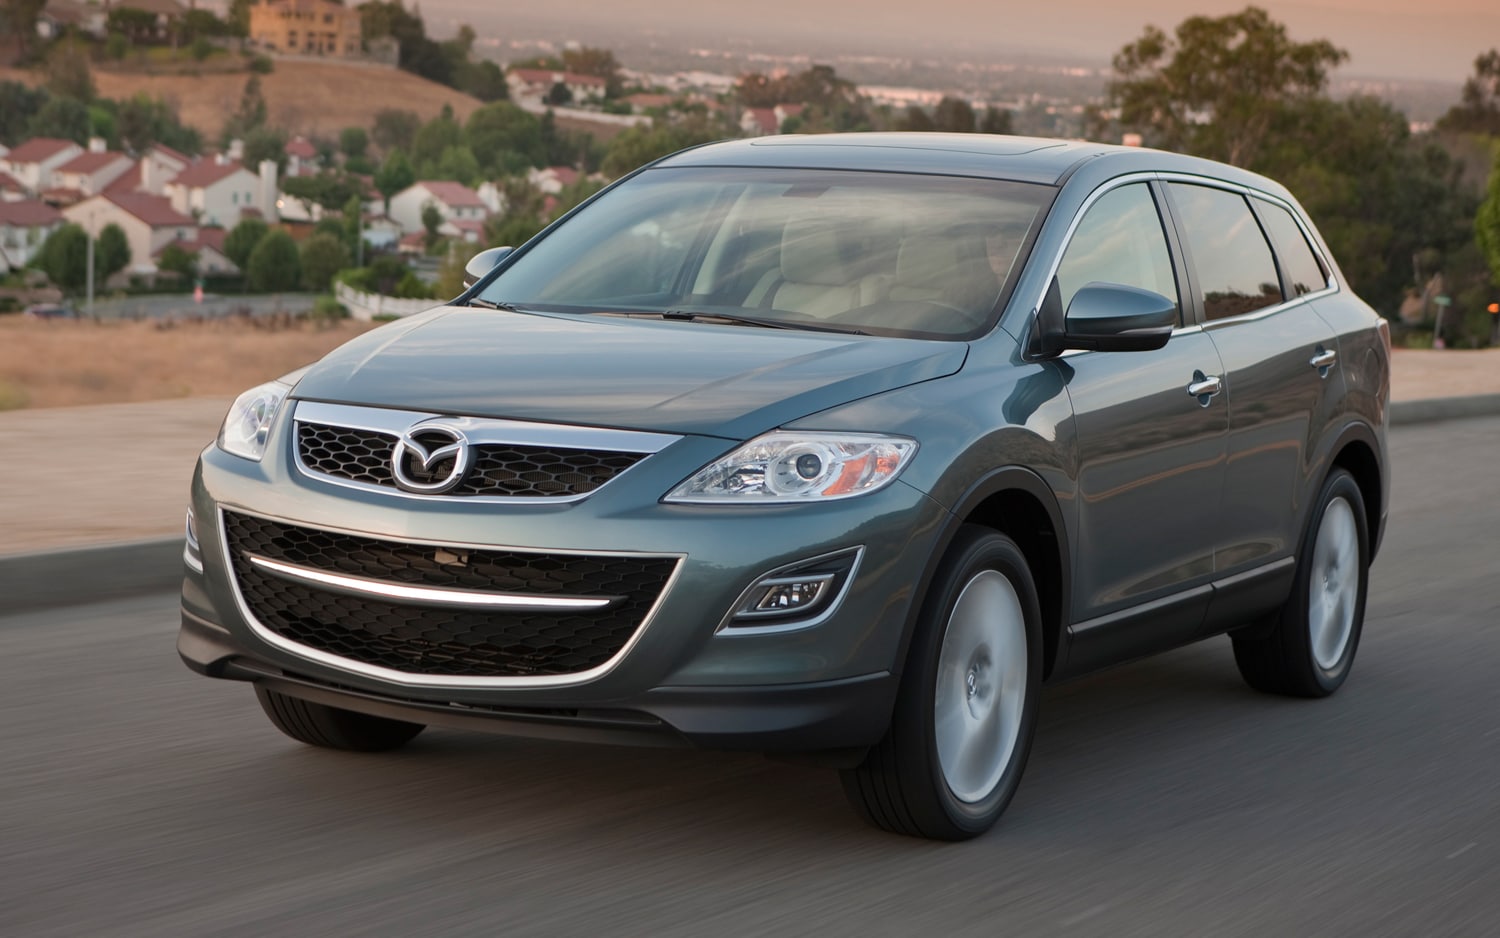 First Test: 2012 Mazda CX-9 Grand Touring FWD